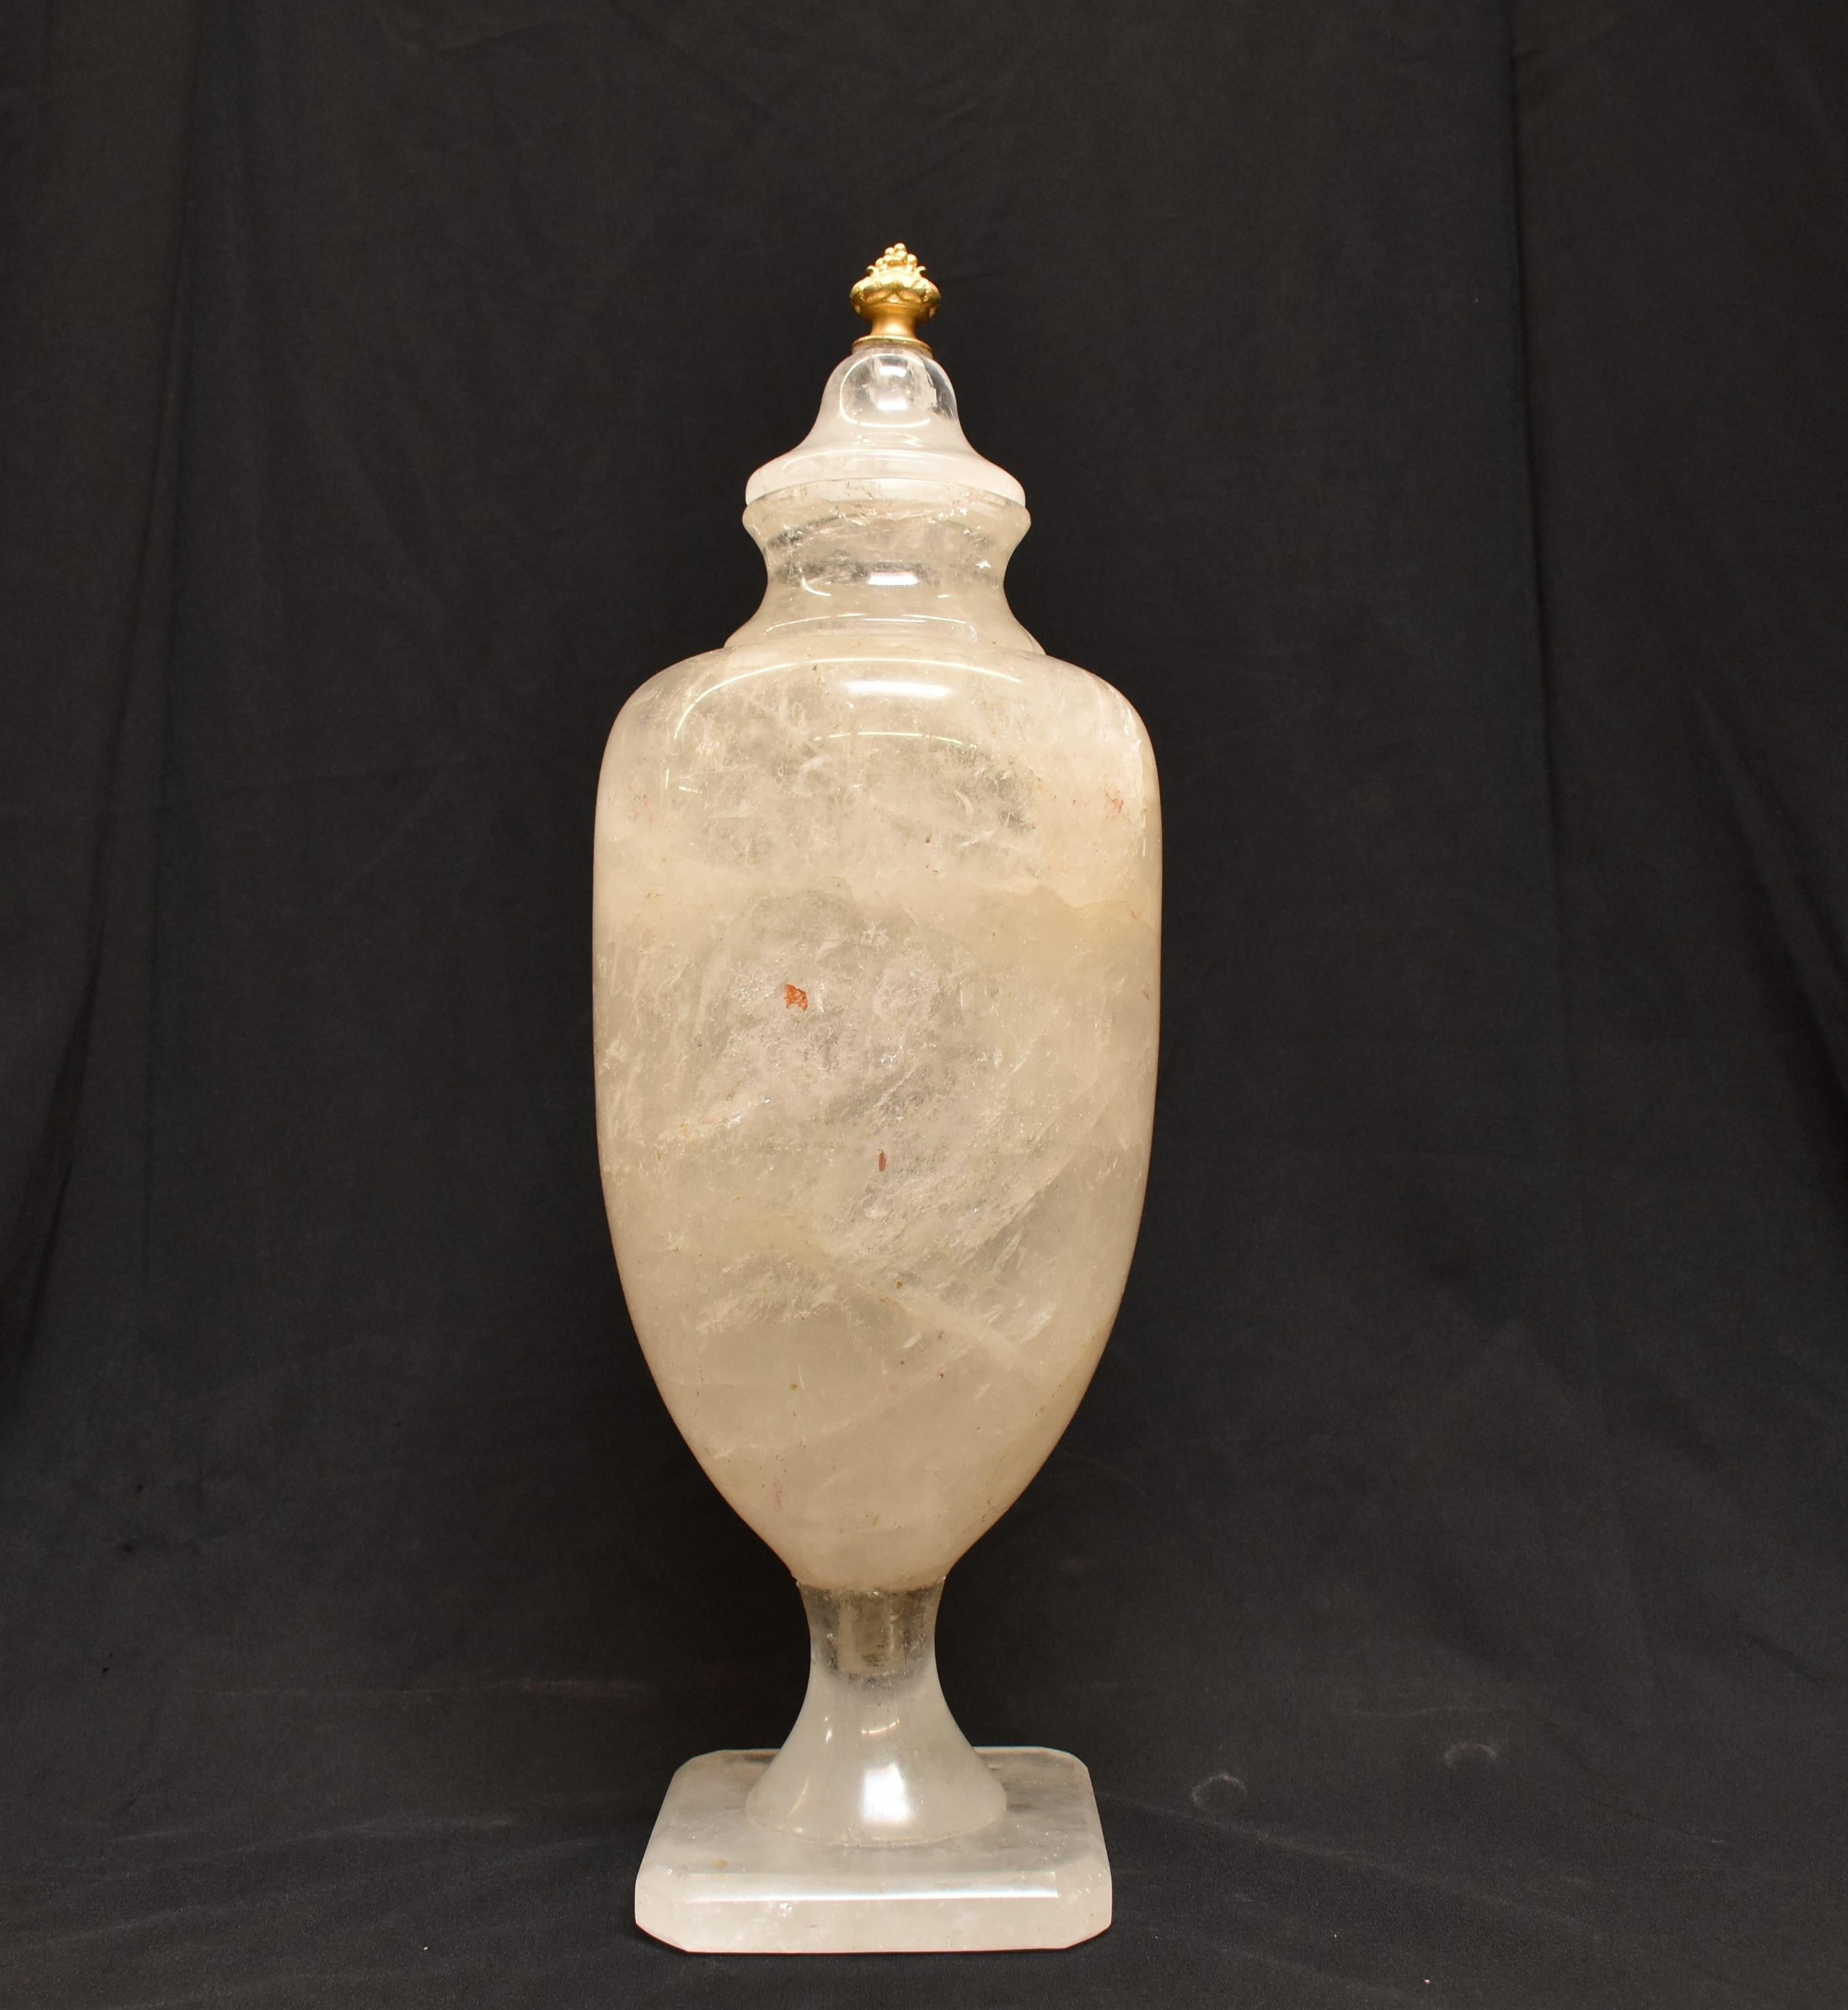 Ormolu Pair of Rock Crystal Urns with Gold Finials